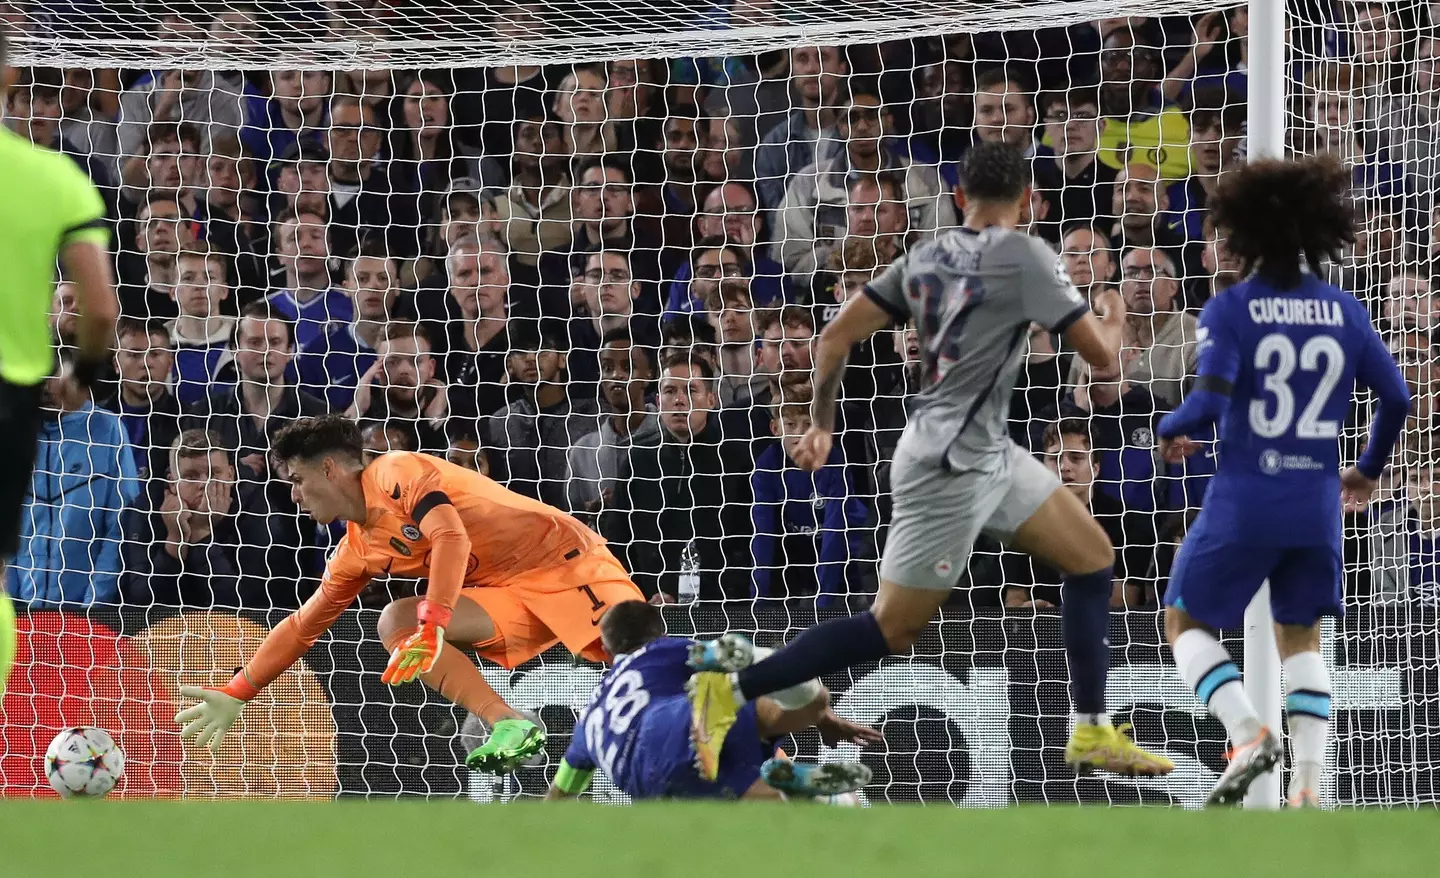 Kepa Arrizabalaga of Chelsea dives but fails to keep out the shot of Noah Okafor of Red Bull Salzburg as he scores to make it 1-1 during the UEFA Champions League match. (Alamy)